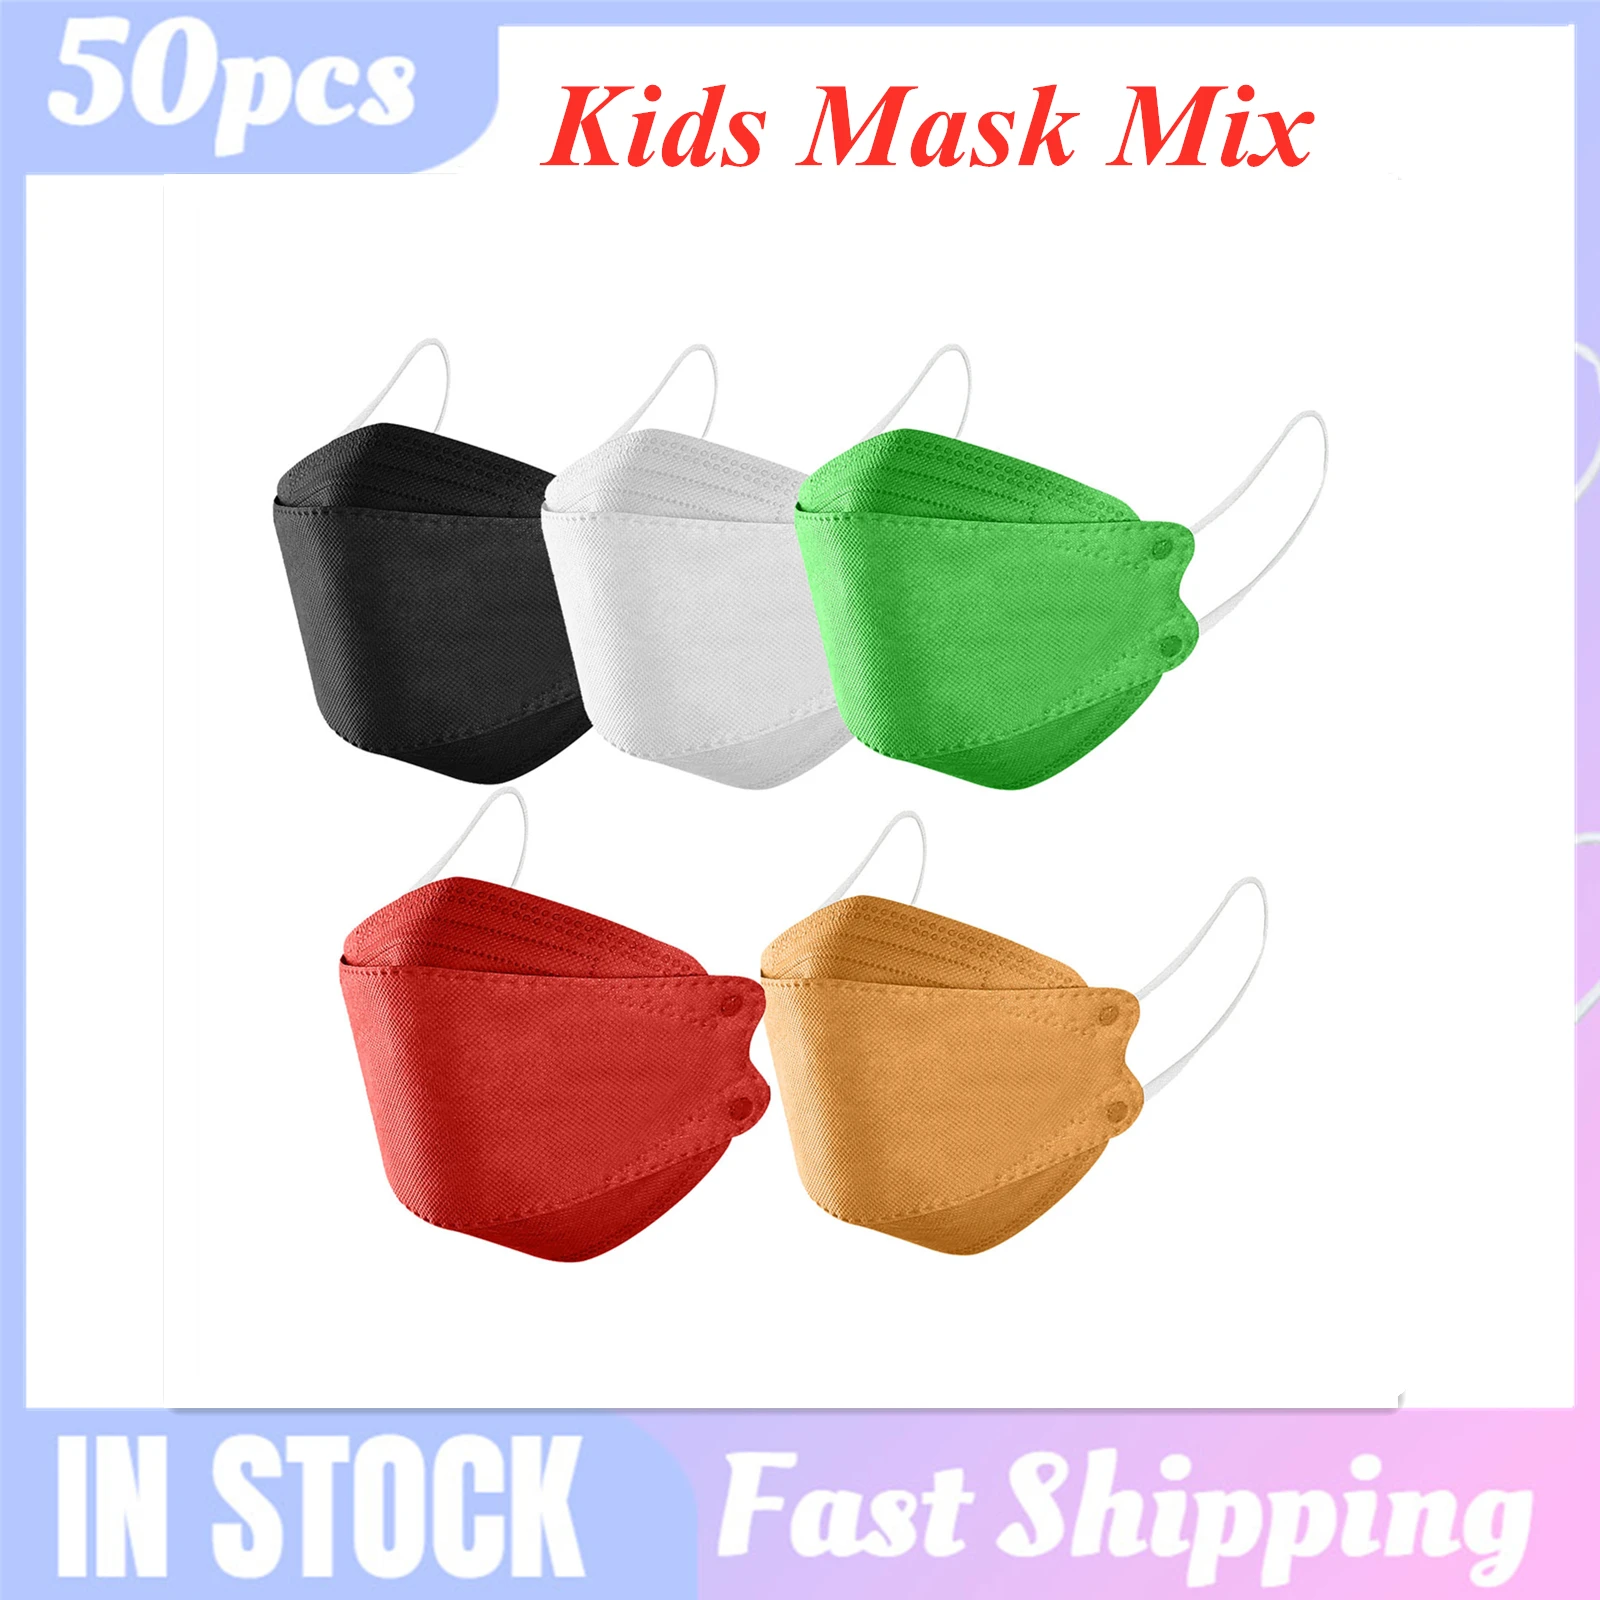 

50pcs Children Mask Droplet Haze Prevention Fish Non Woven Face Mask 4 Layers Mouth Mask Halloween Cosplay Masque Mascarillas